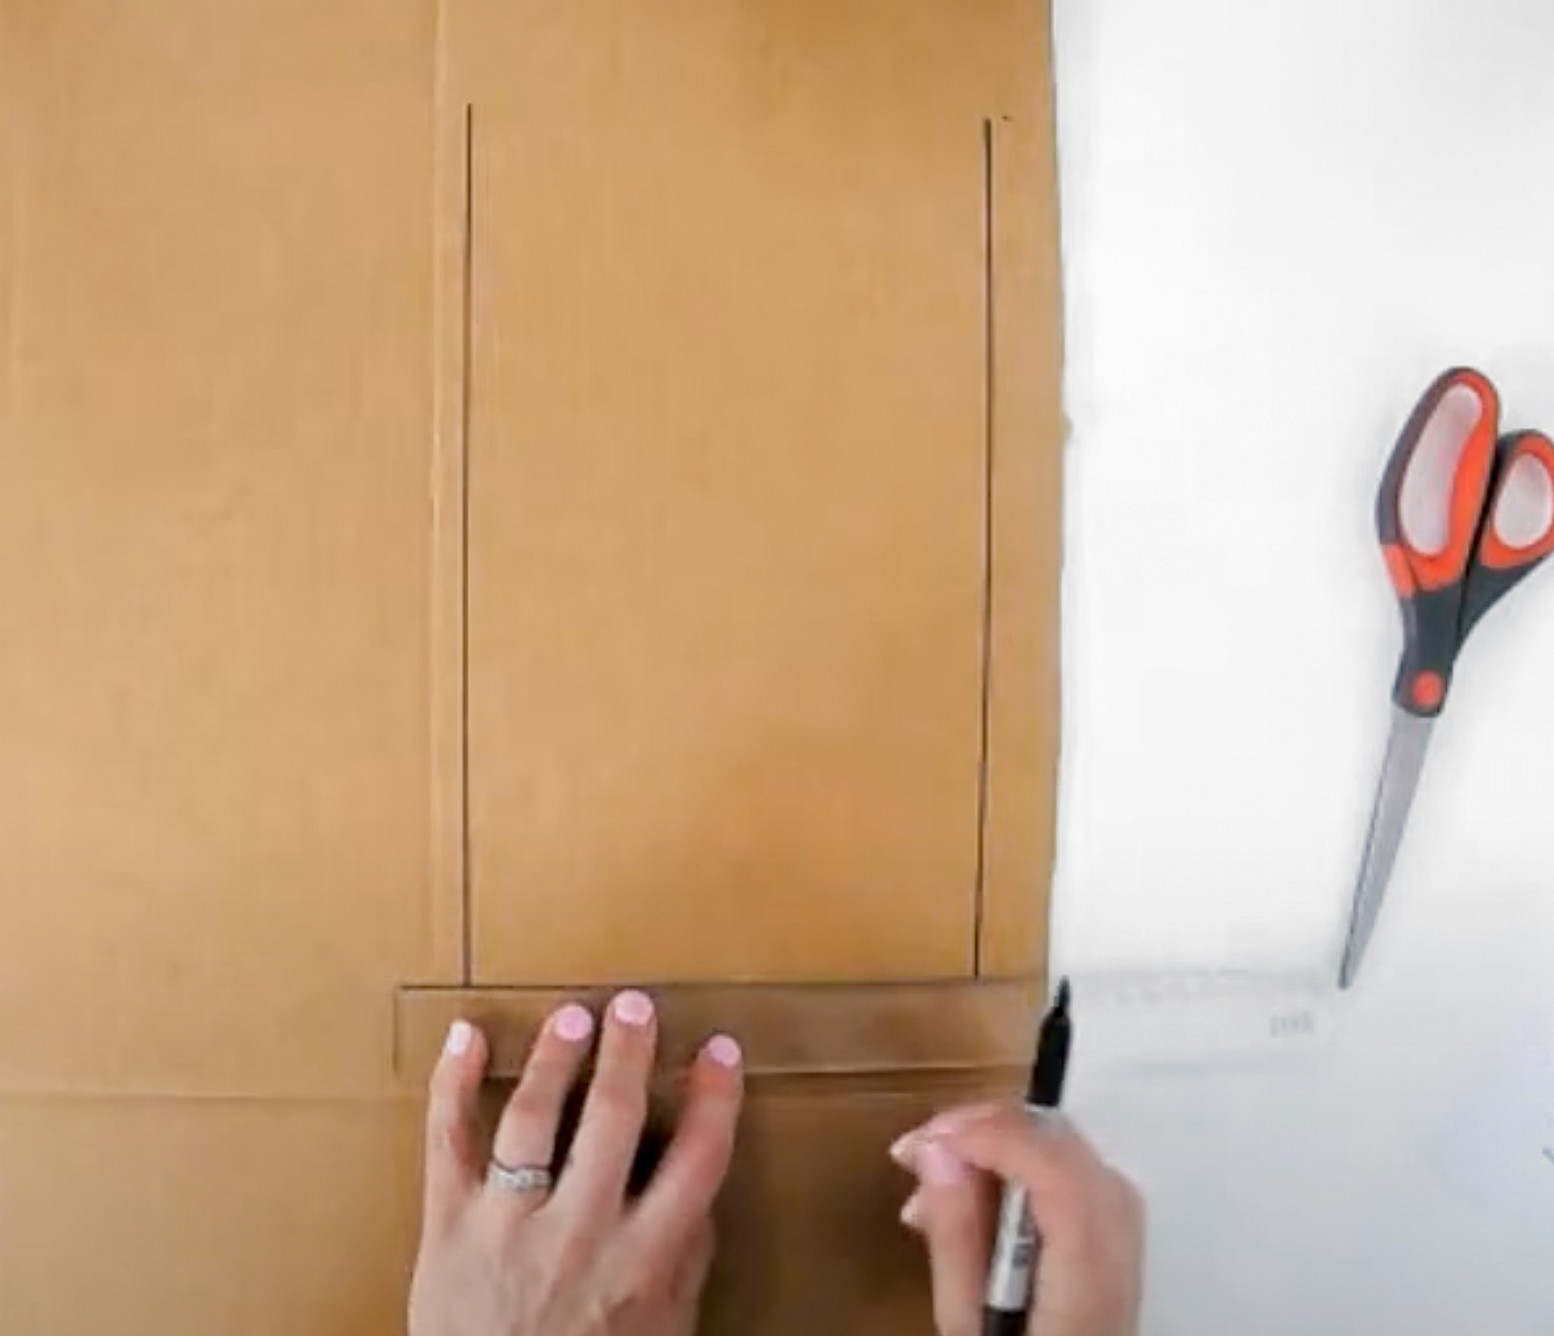 This is an image of hands drawing on a cardboard sheet with a ruler and vivd.